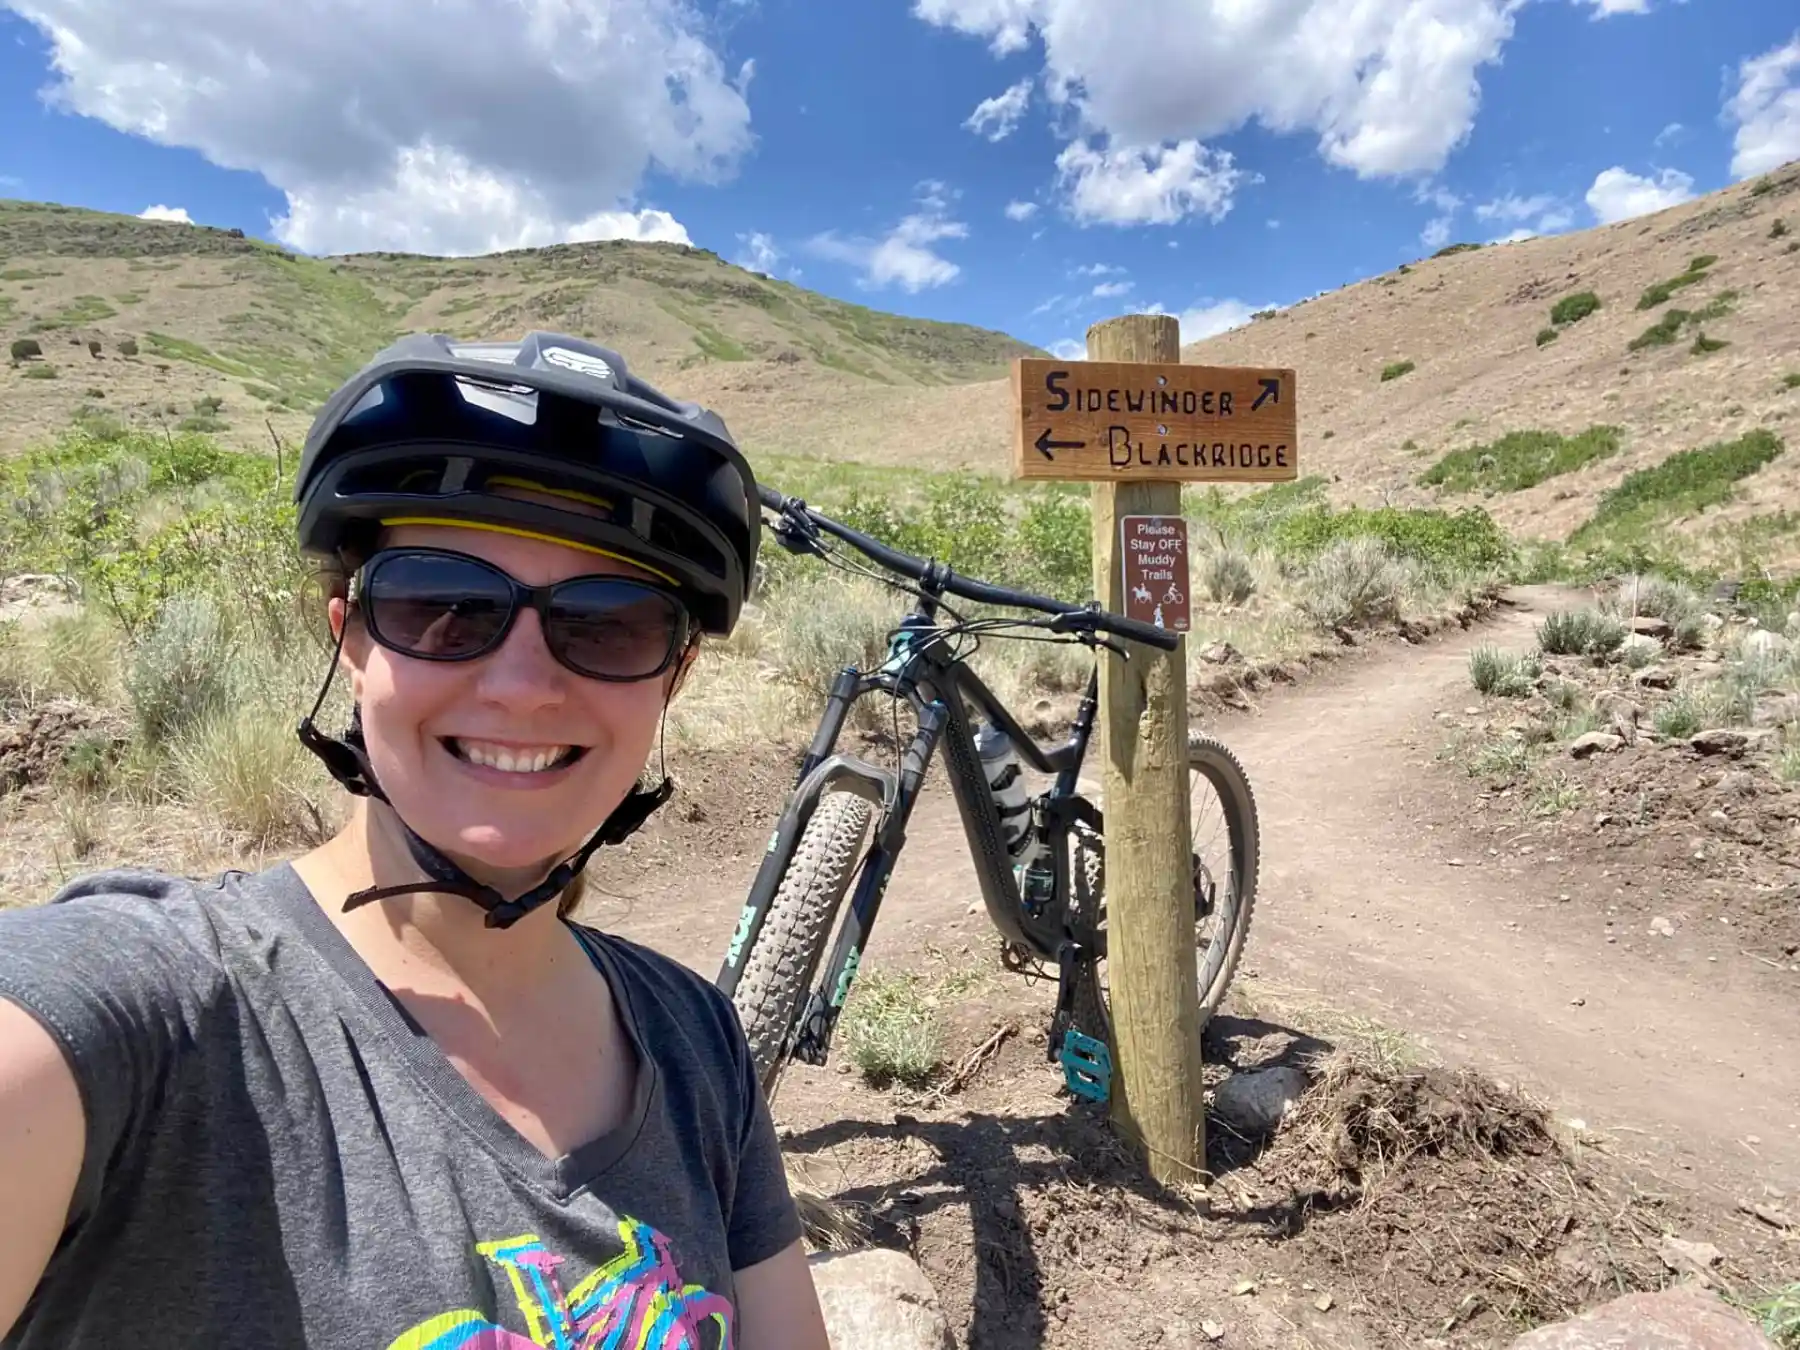 Lindsey is really progressing with her mountain biking skills!